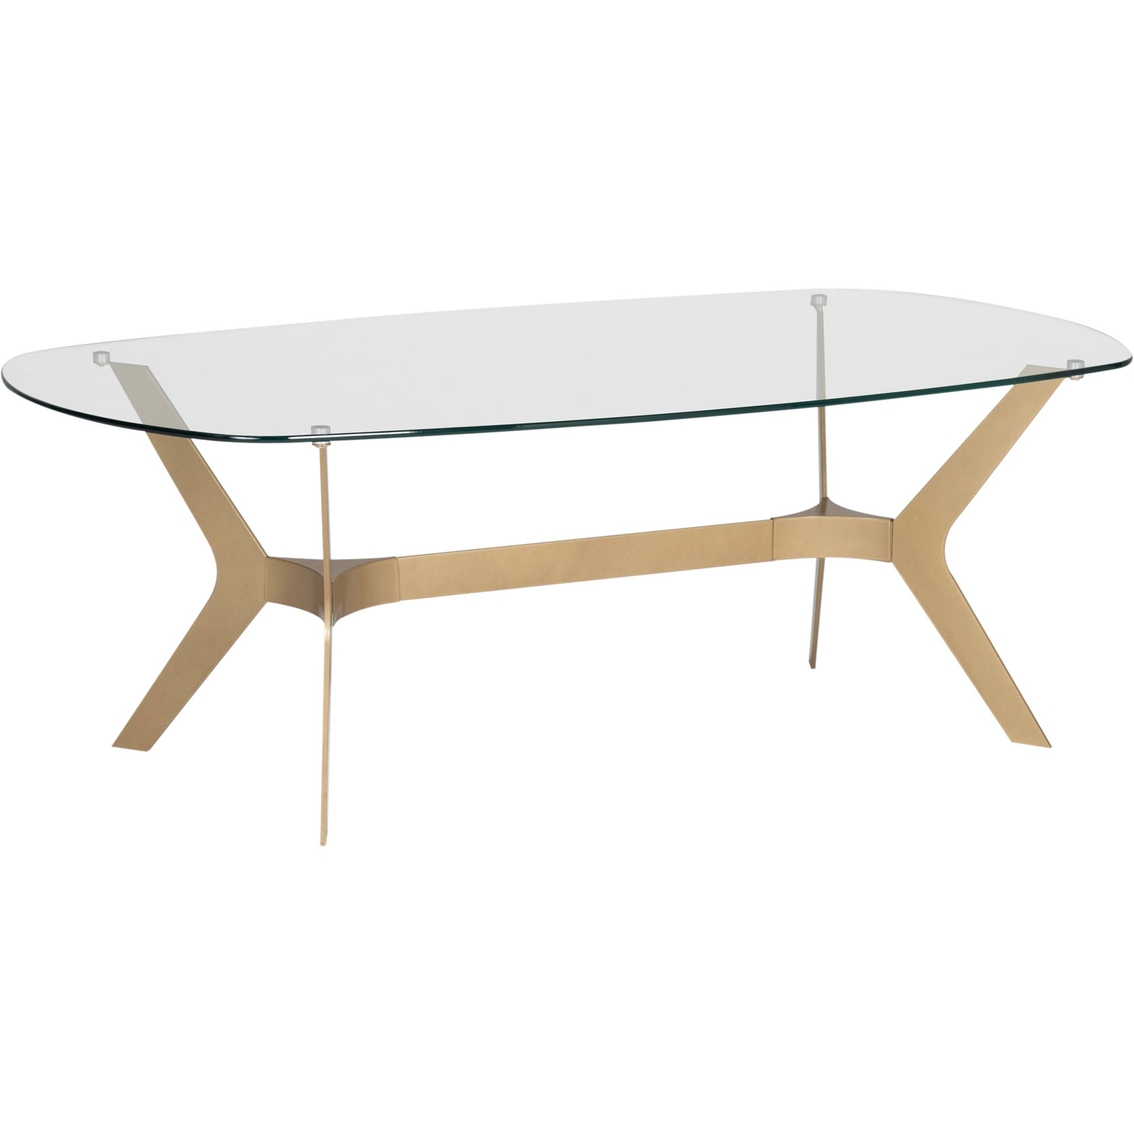 Studio Designs Home Archtech Modern Coffee Table - Image 2 of 4